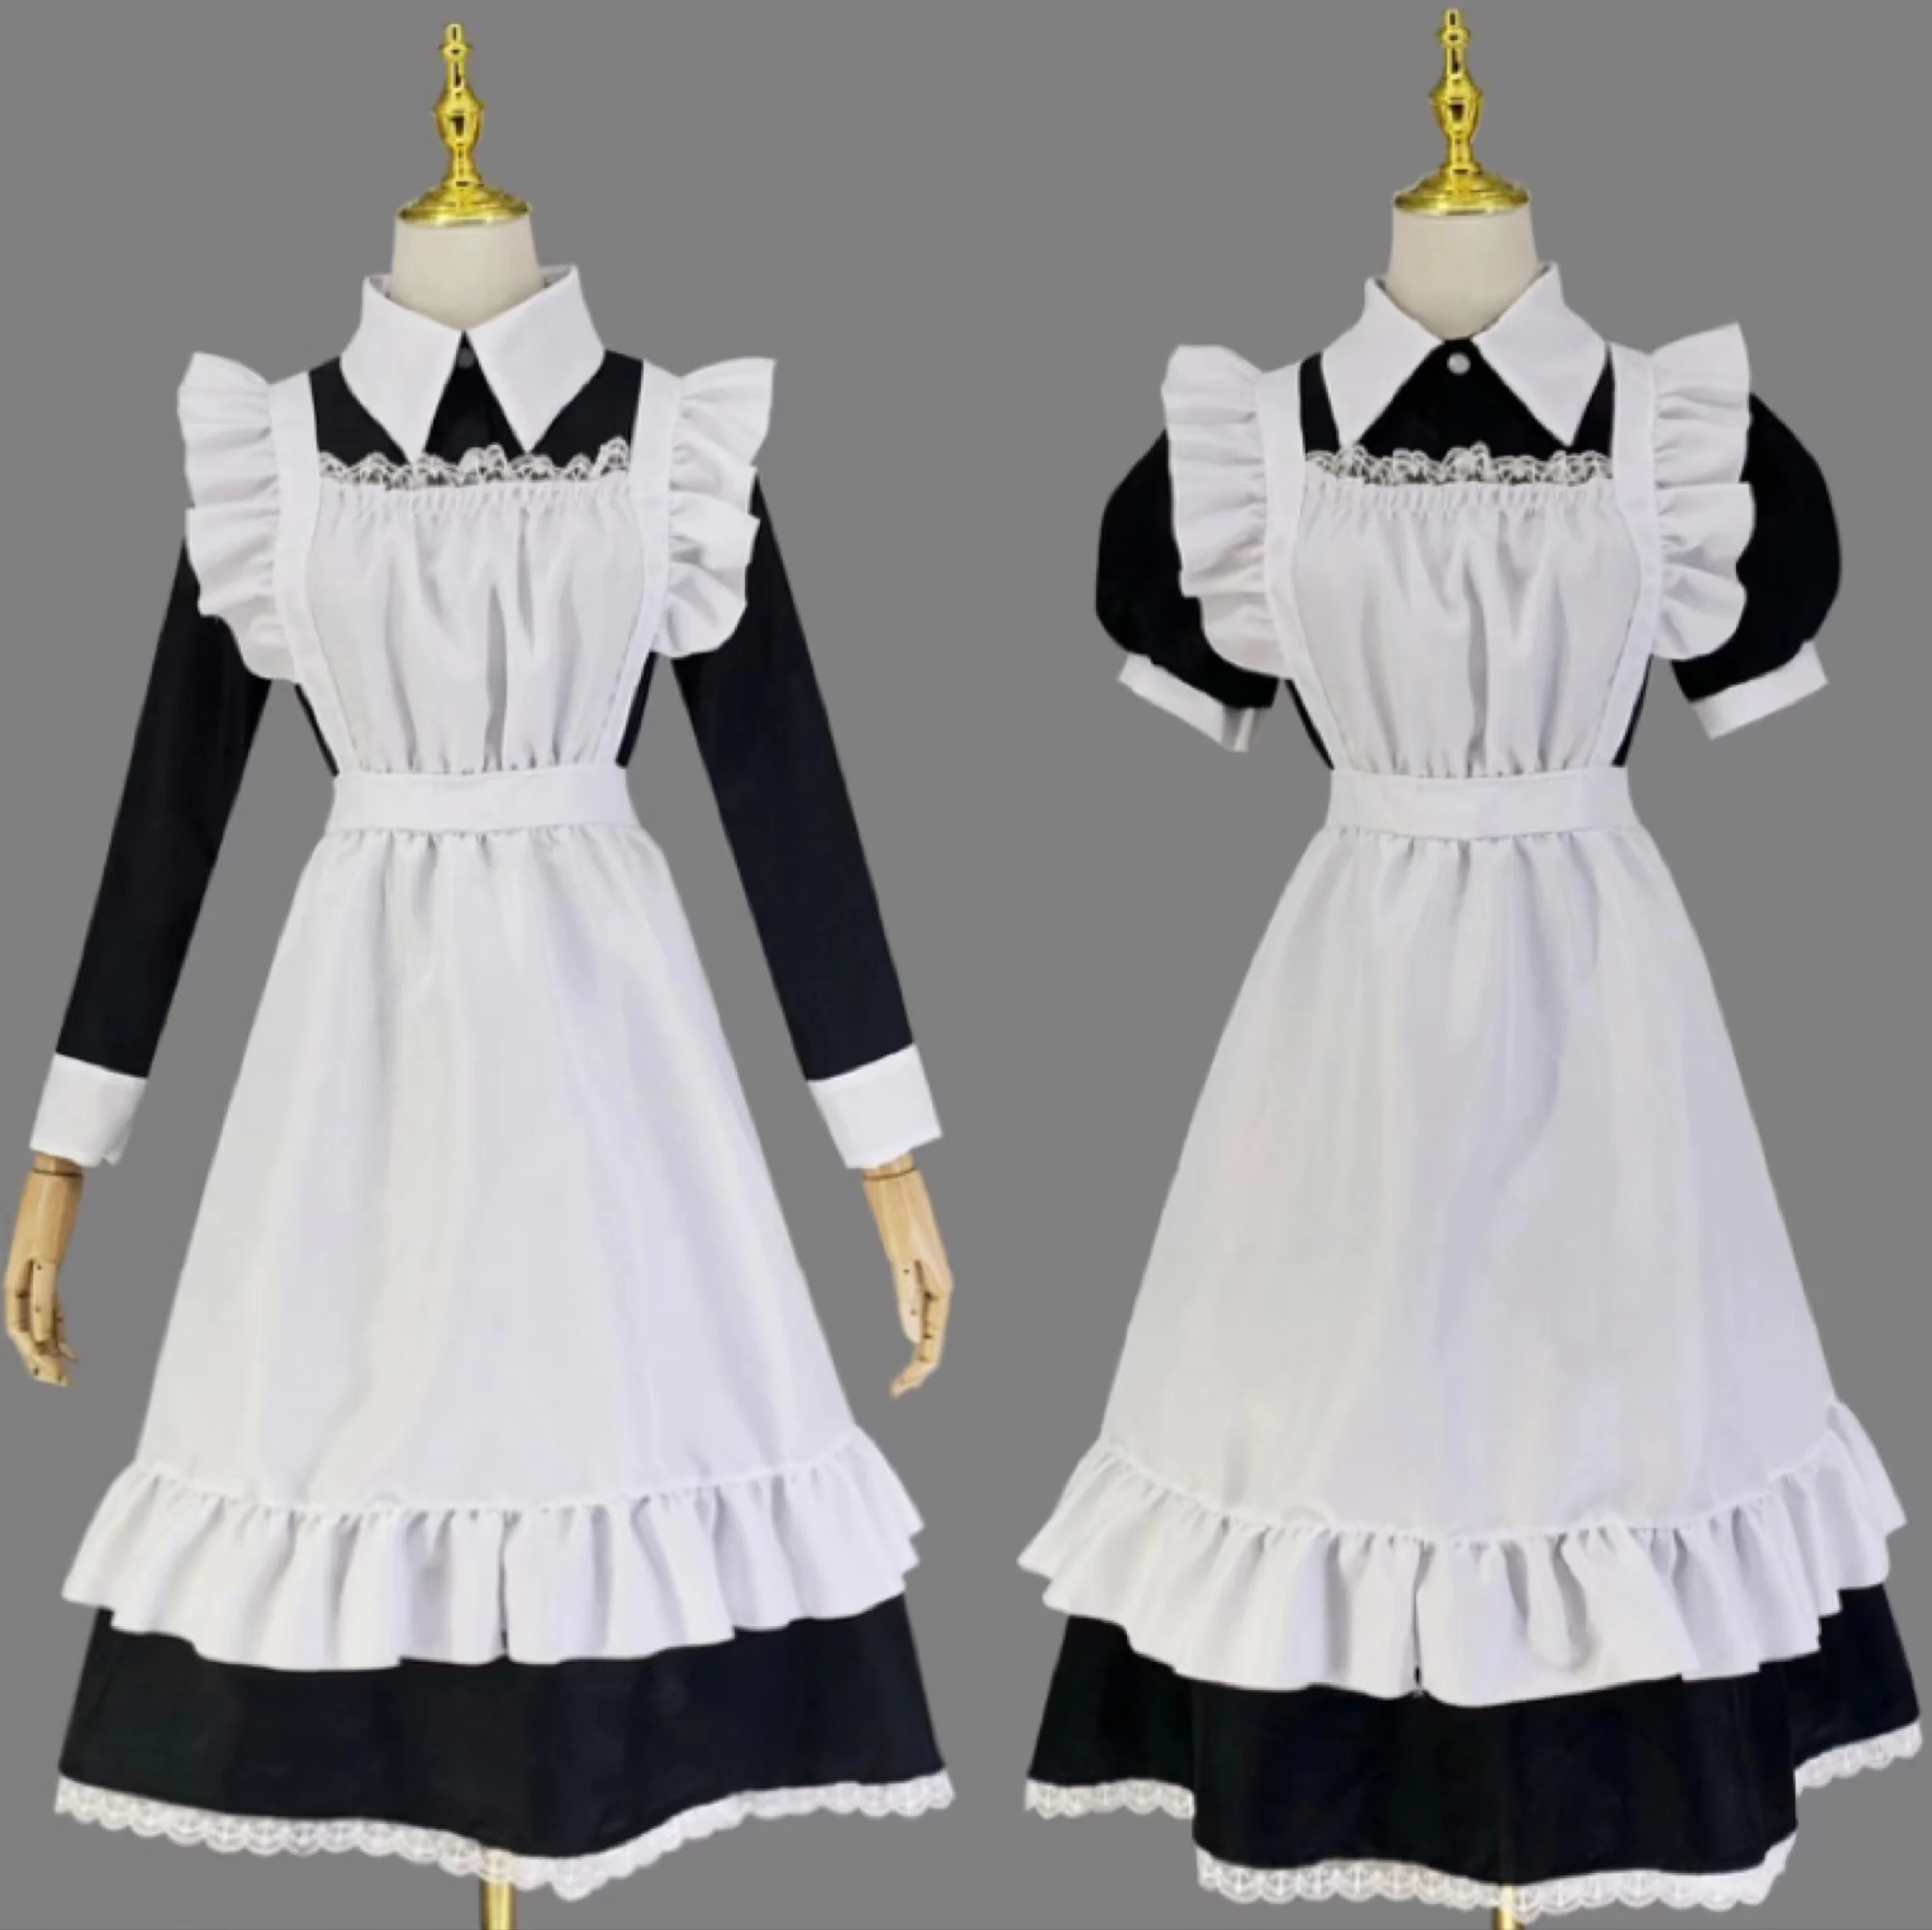 

2022 Women Cute Maid Outfit Apron Dress Cross Dressing Housekeeper Japanese Uniforms Halloween Cosplay Costume Free Shipping